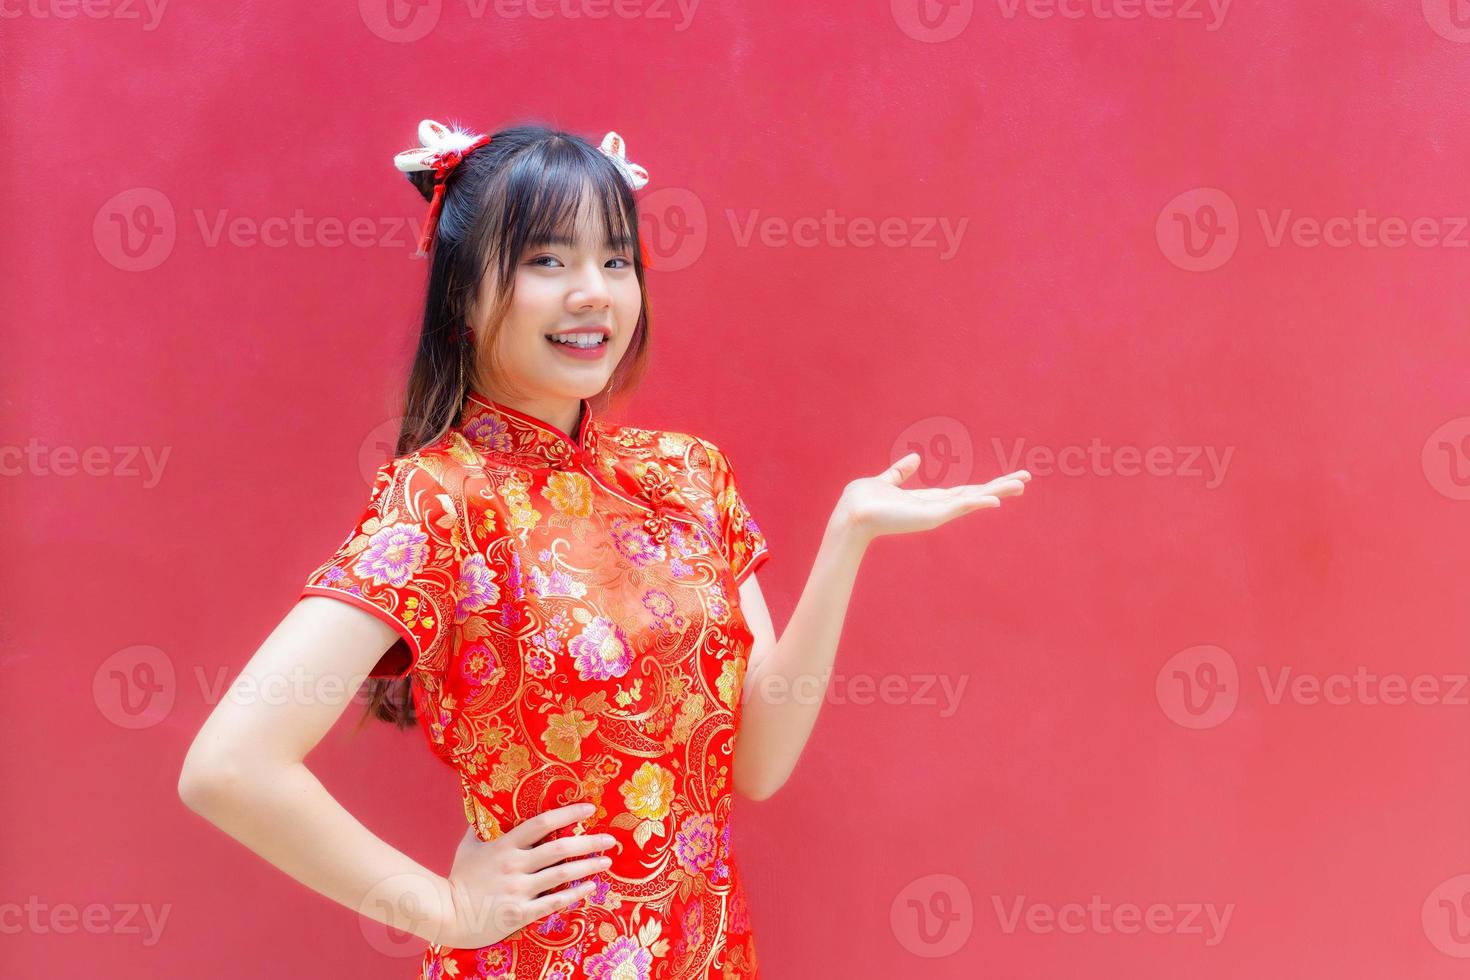 10 Reasons to Have Your Wedding During the Chinese New Year